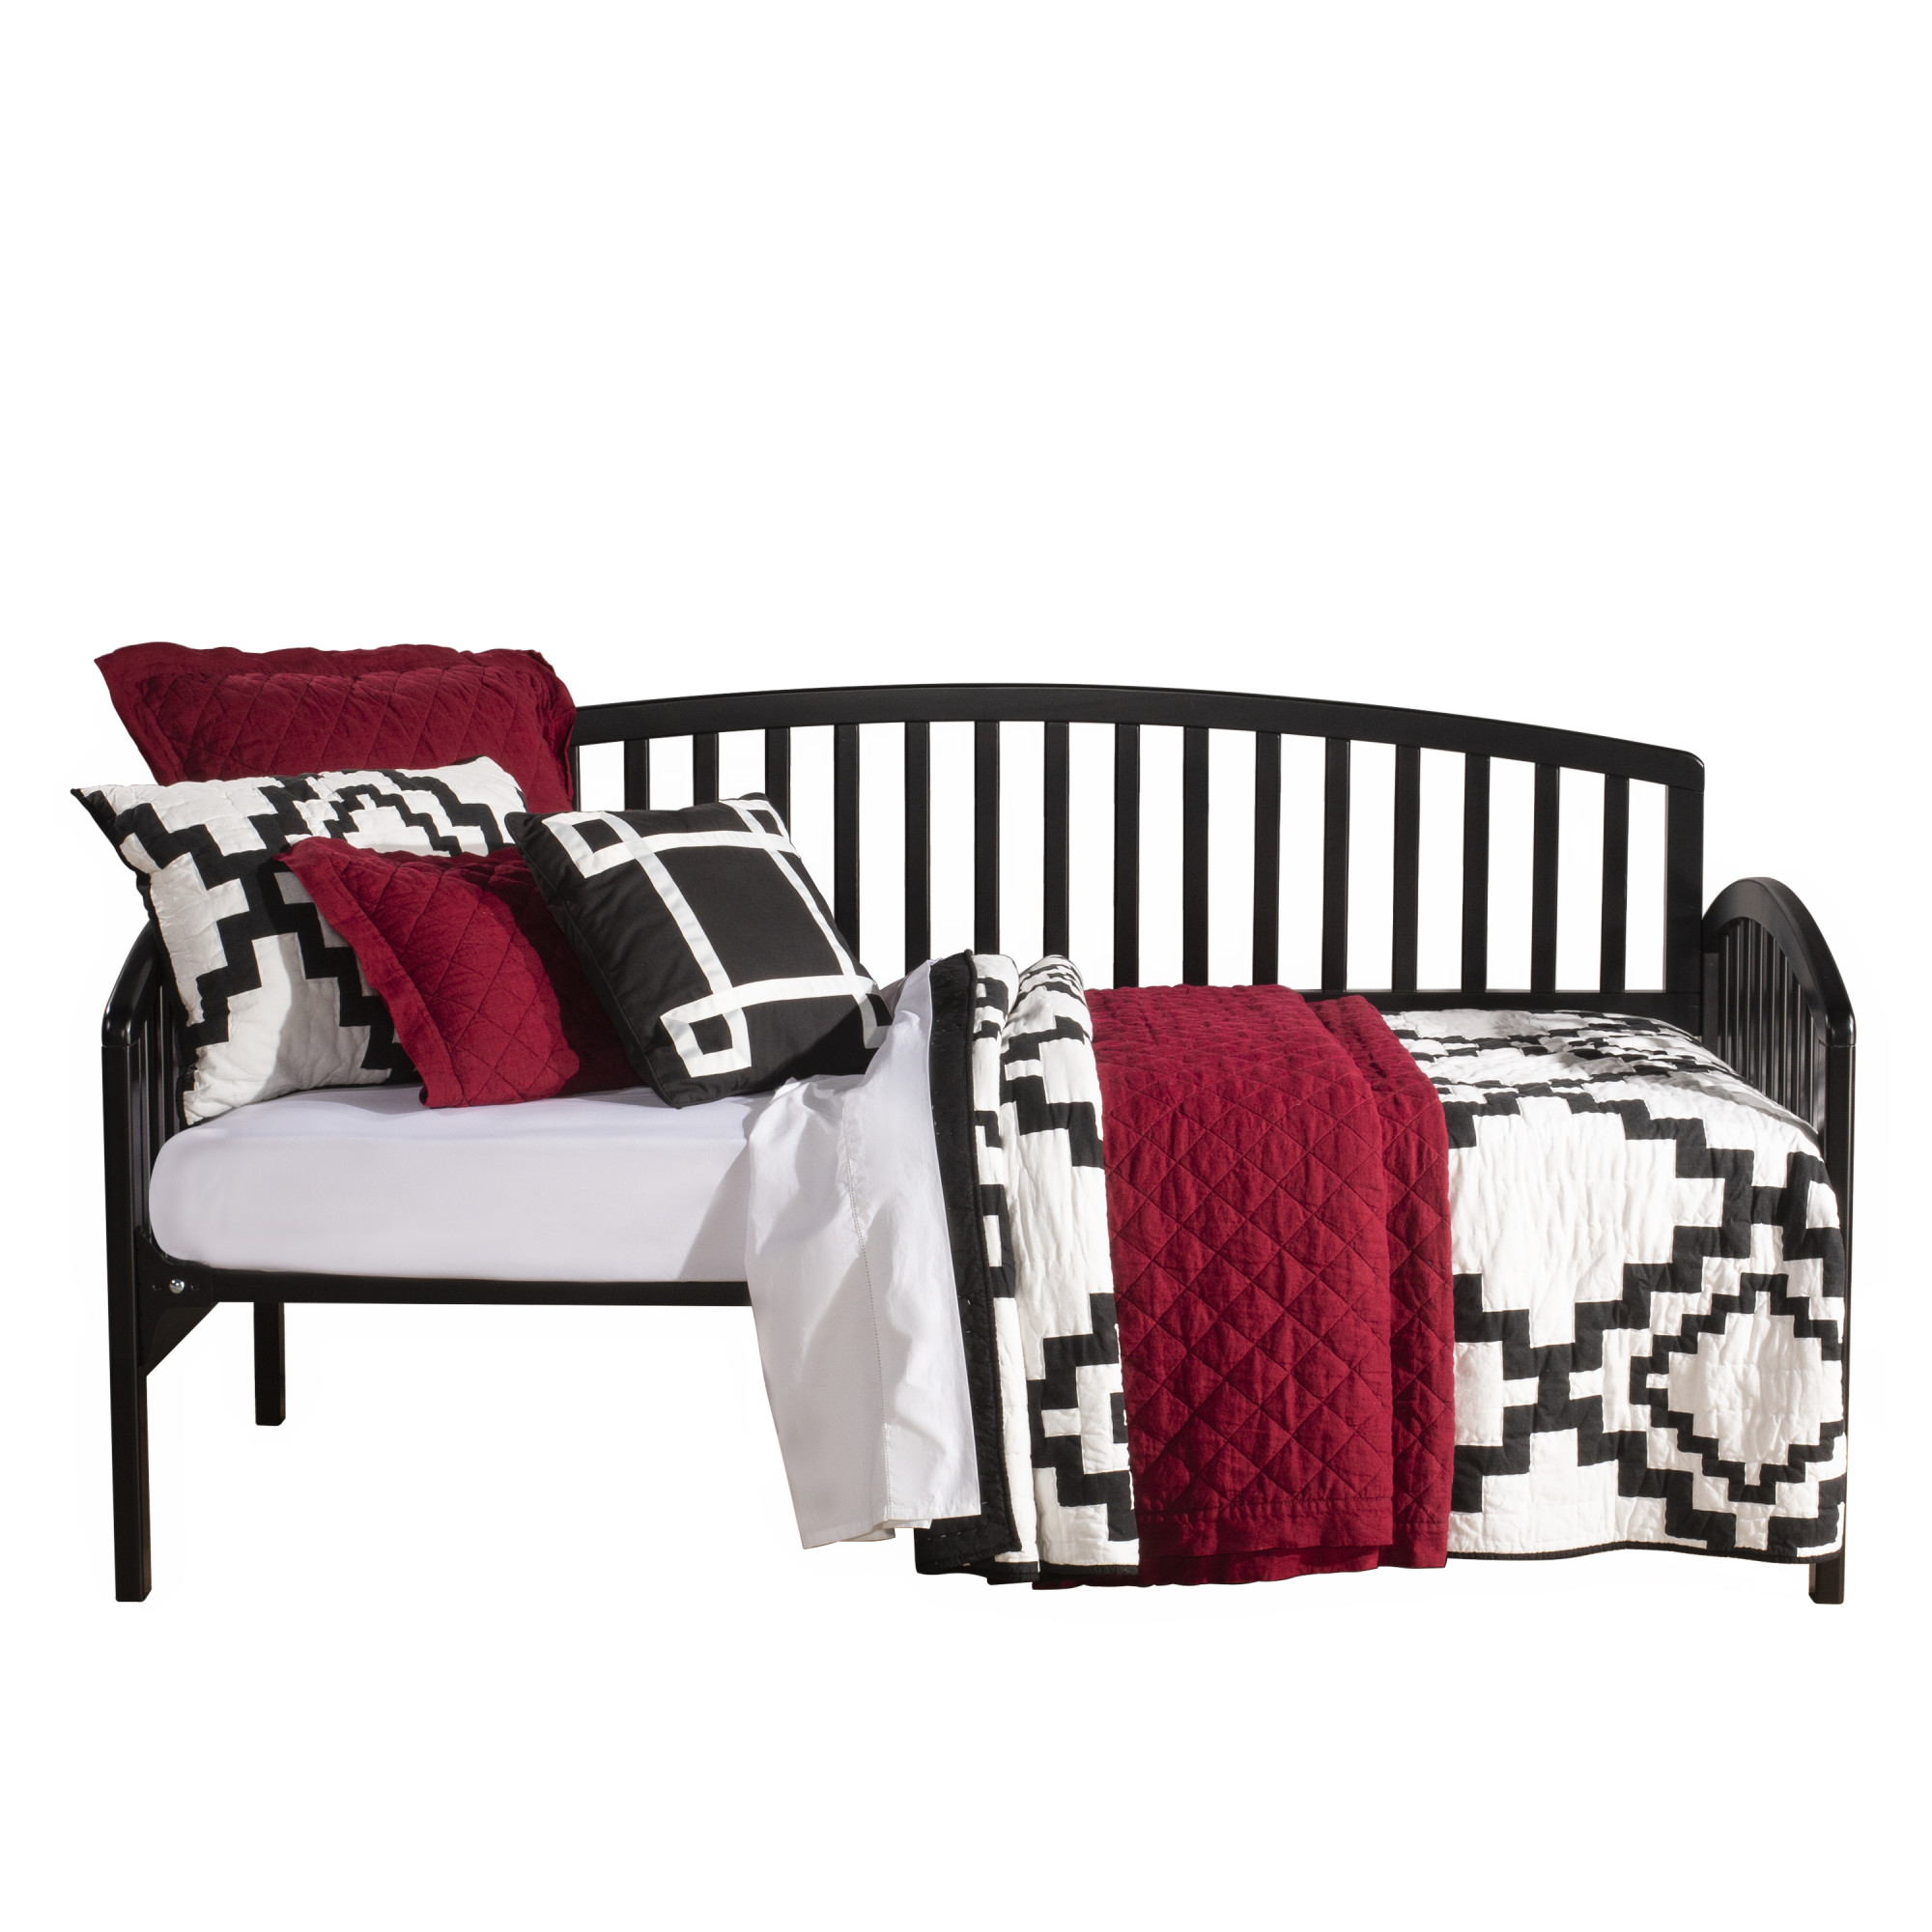 Hillsdale Furniture Carolina Wood Twin Daybed, Rubbed Black - image 4 of 11